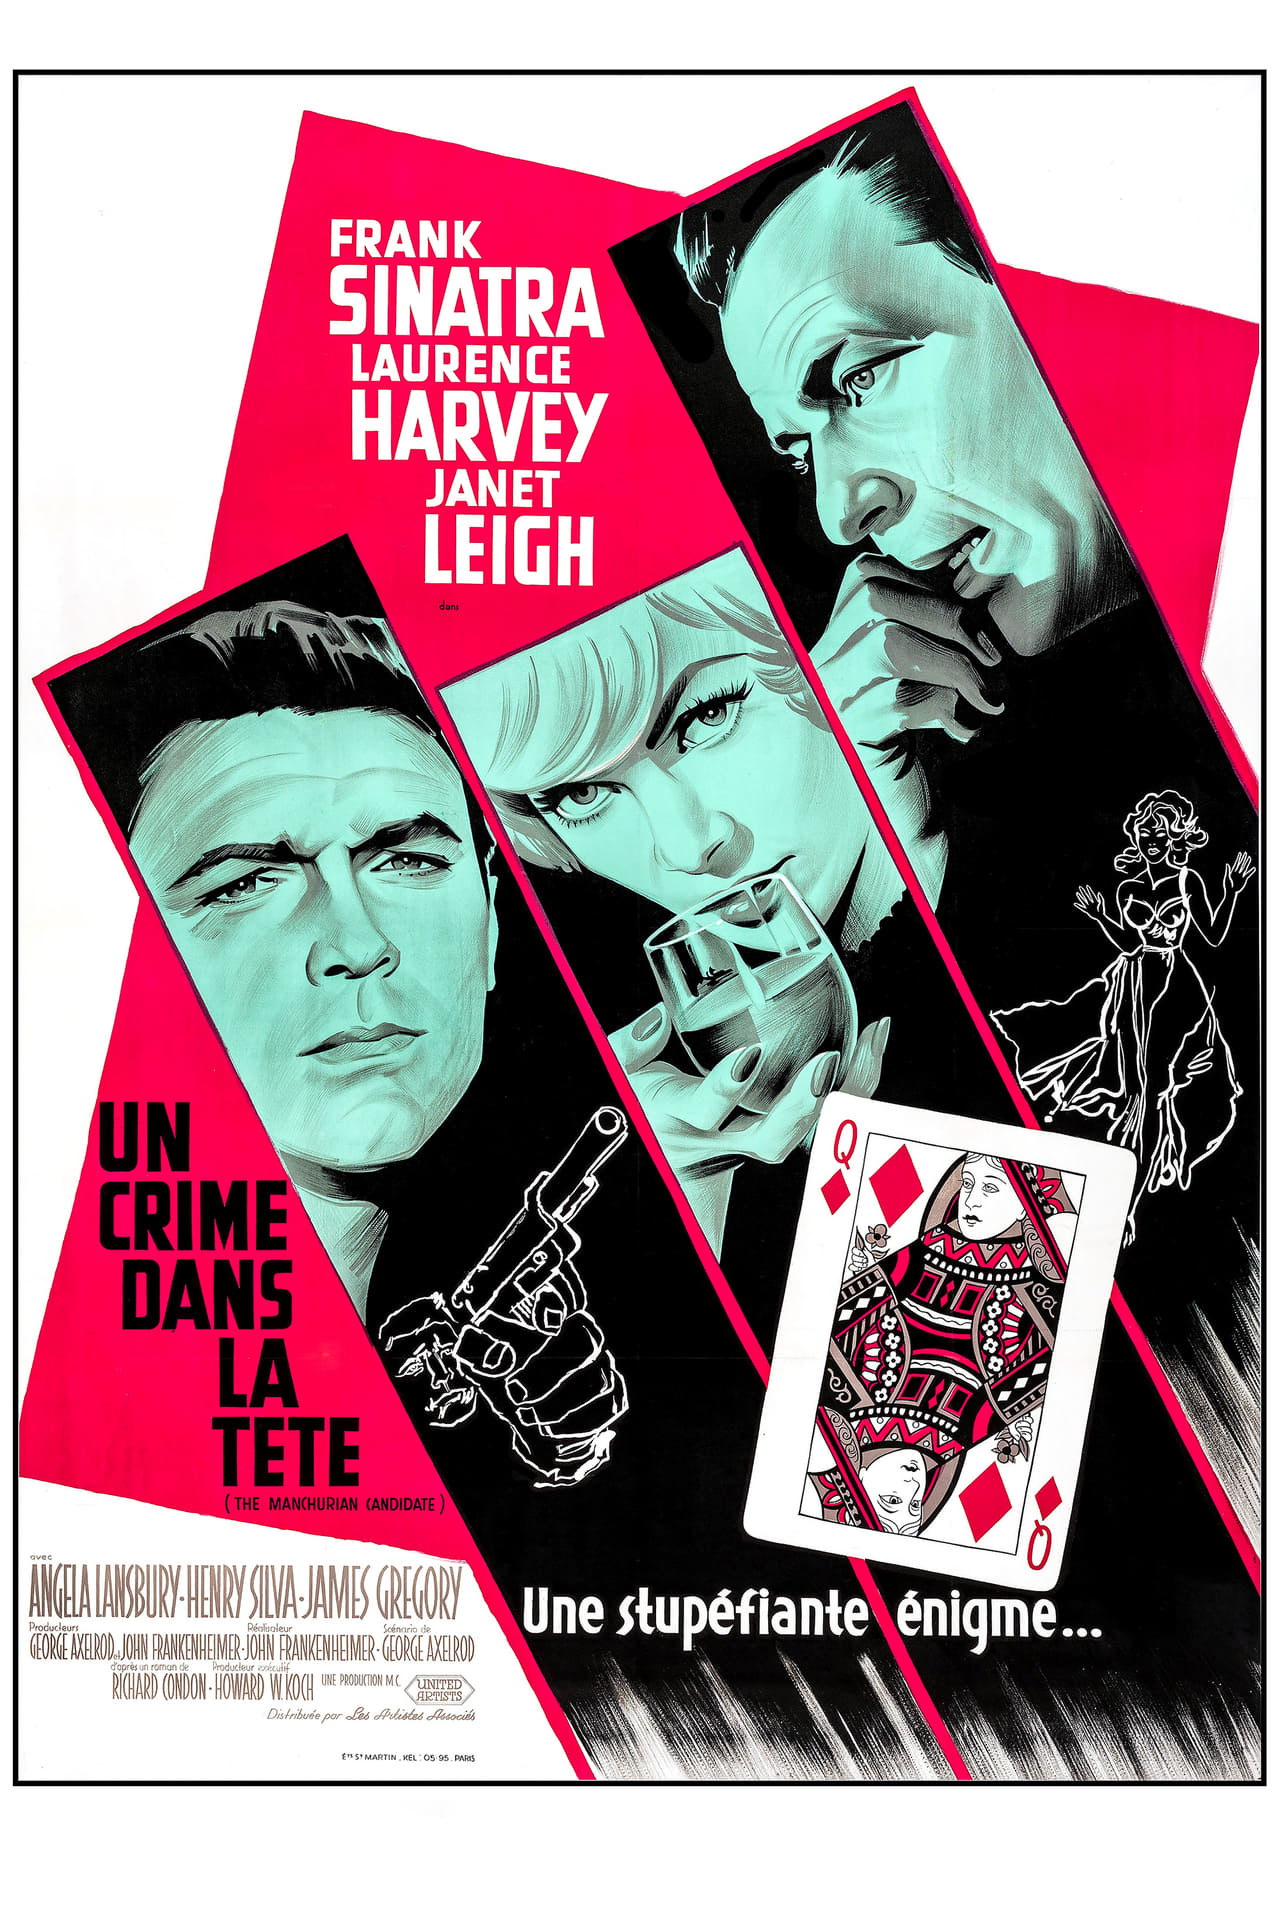 the manchurian candidate reviews